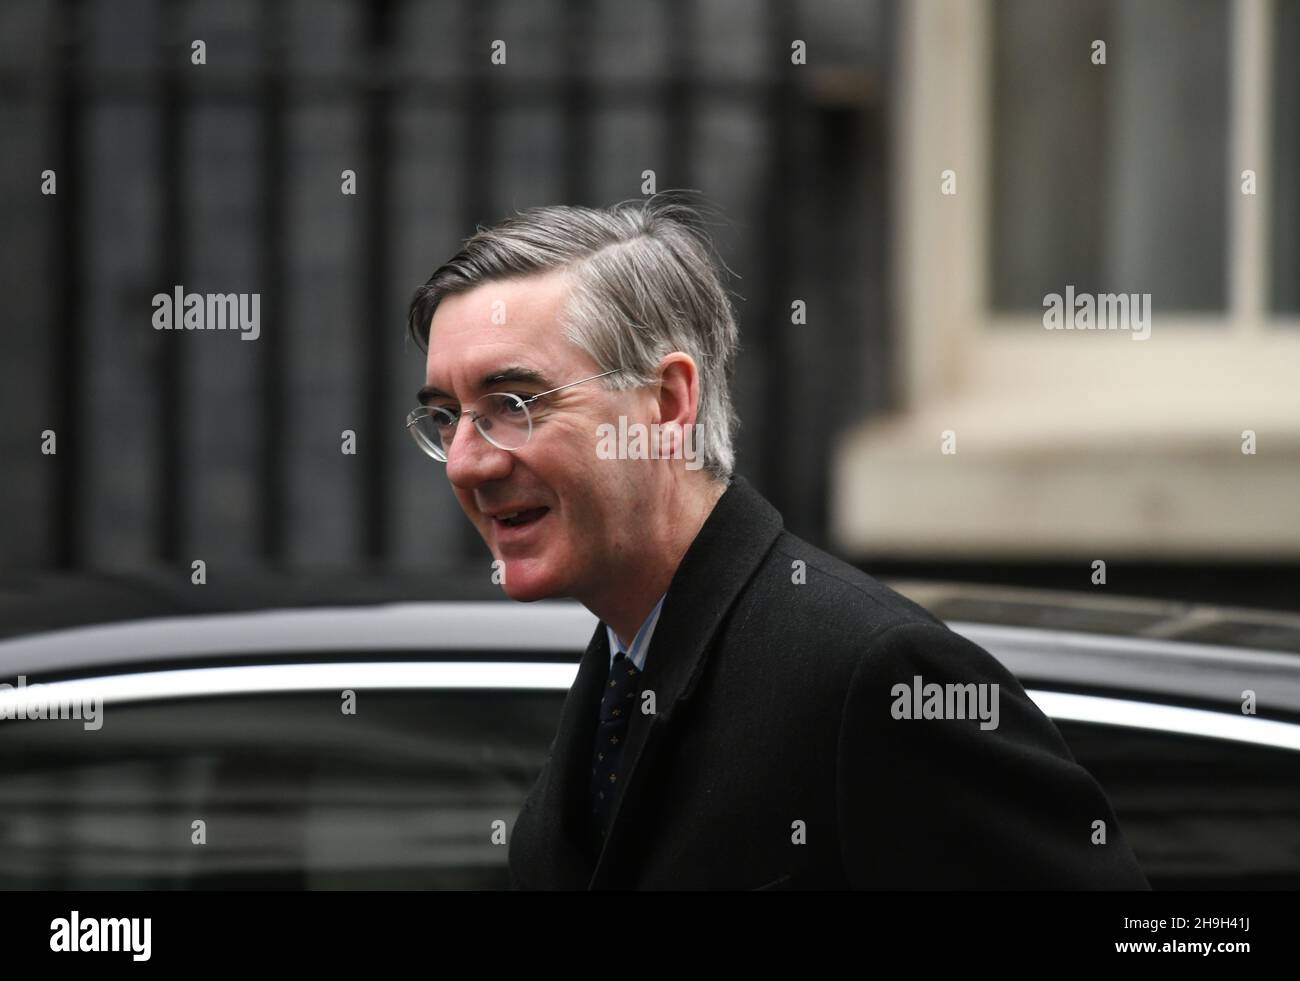 Downing Street, London, Großbritannien. 7. Dezember 2021. Jacob Rees-Mogg MP, Lord President of the Council, Leader of the Commons in Downing Street für wöchentliche Kabinettssitzung. Quelle: Malcolm Park/Alamy Live News. Stockfoto